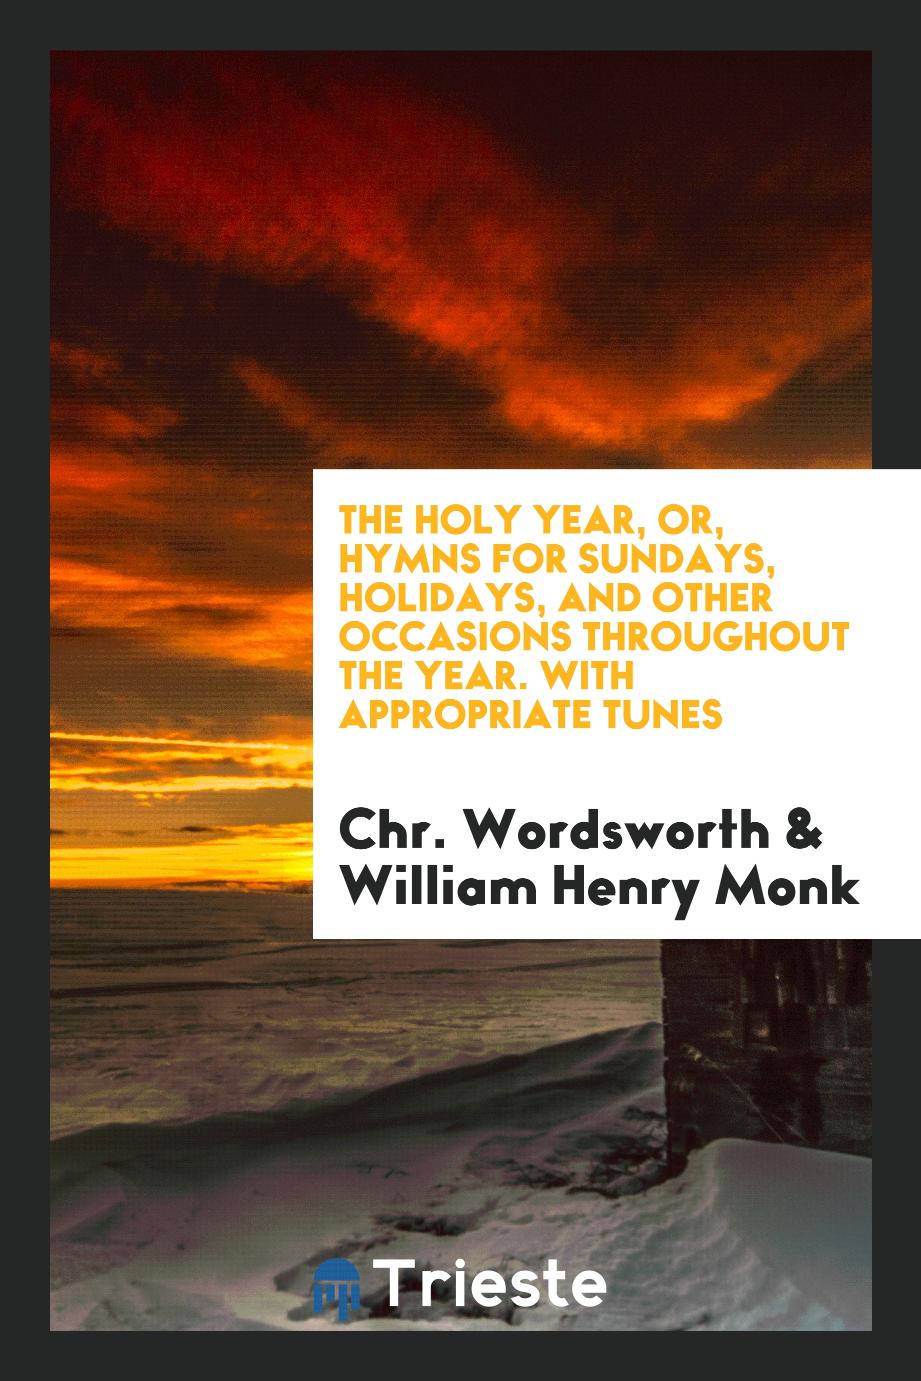 The Holy Year, or, Hymns for Sundays, Holidays, and Other Occasions throughout the Year. With Appropriate Tunes